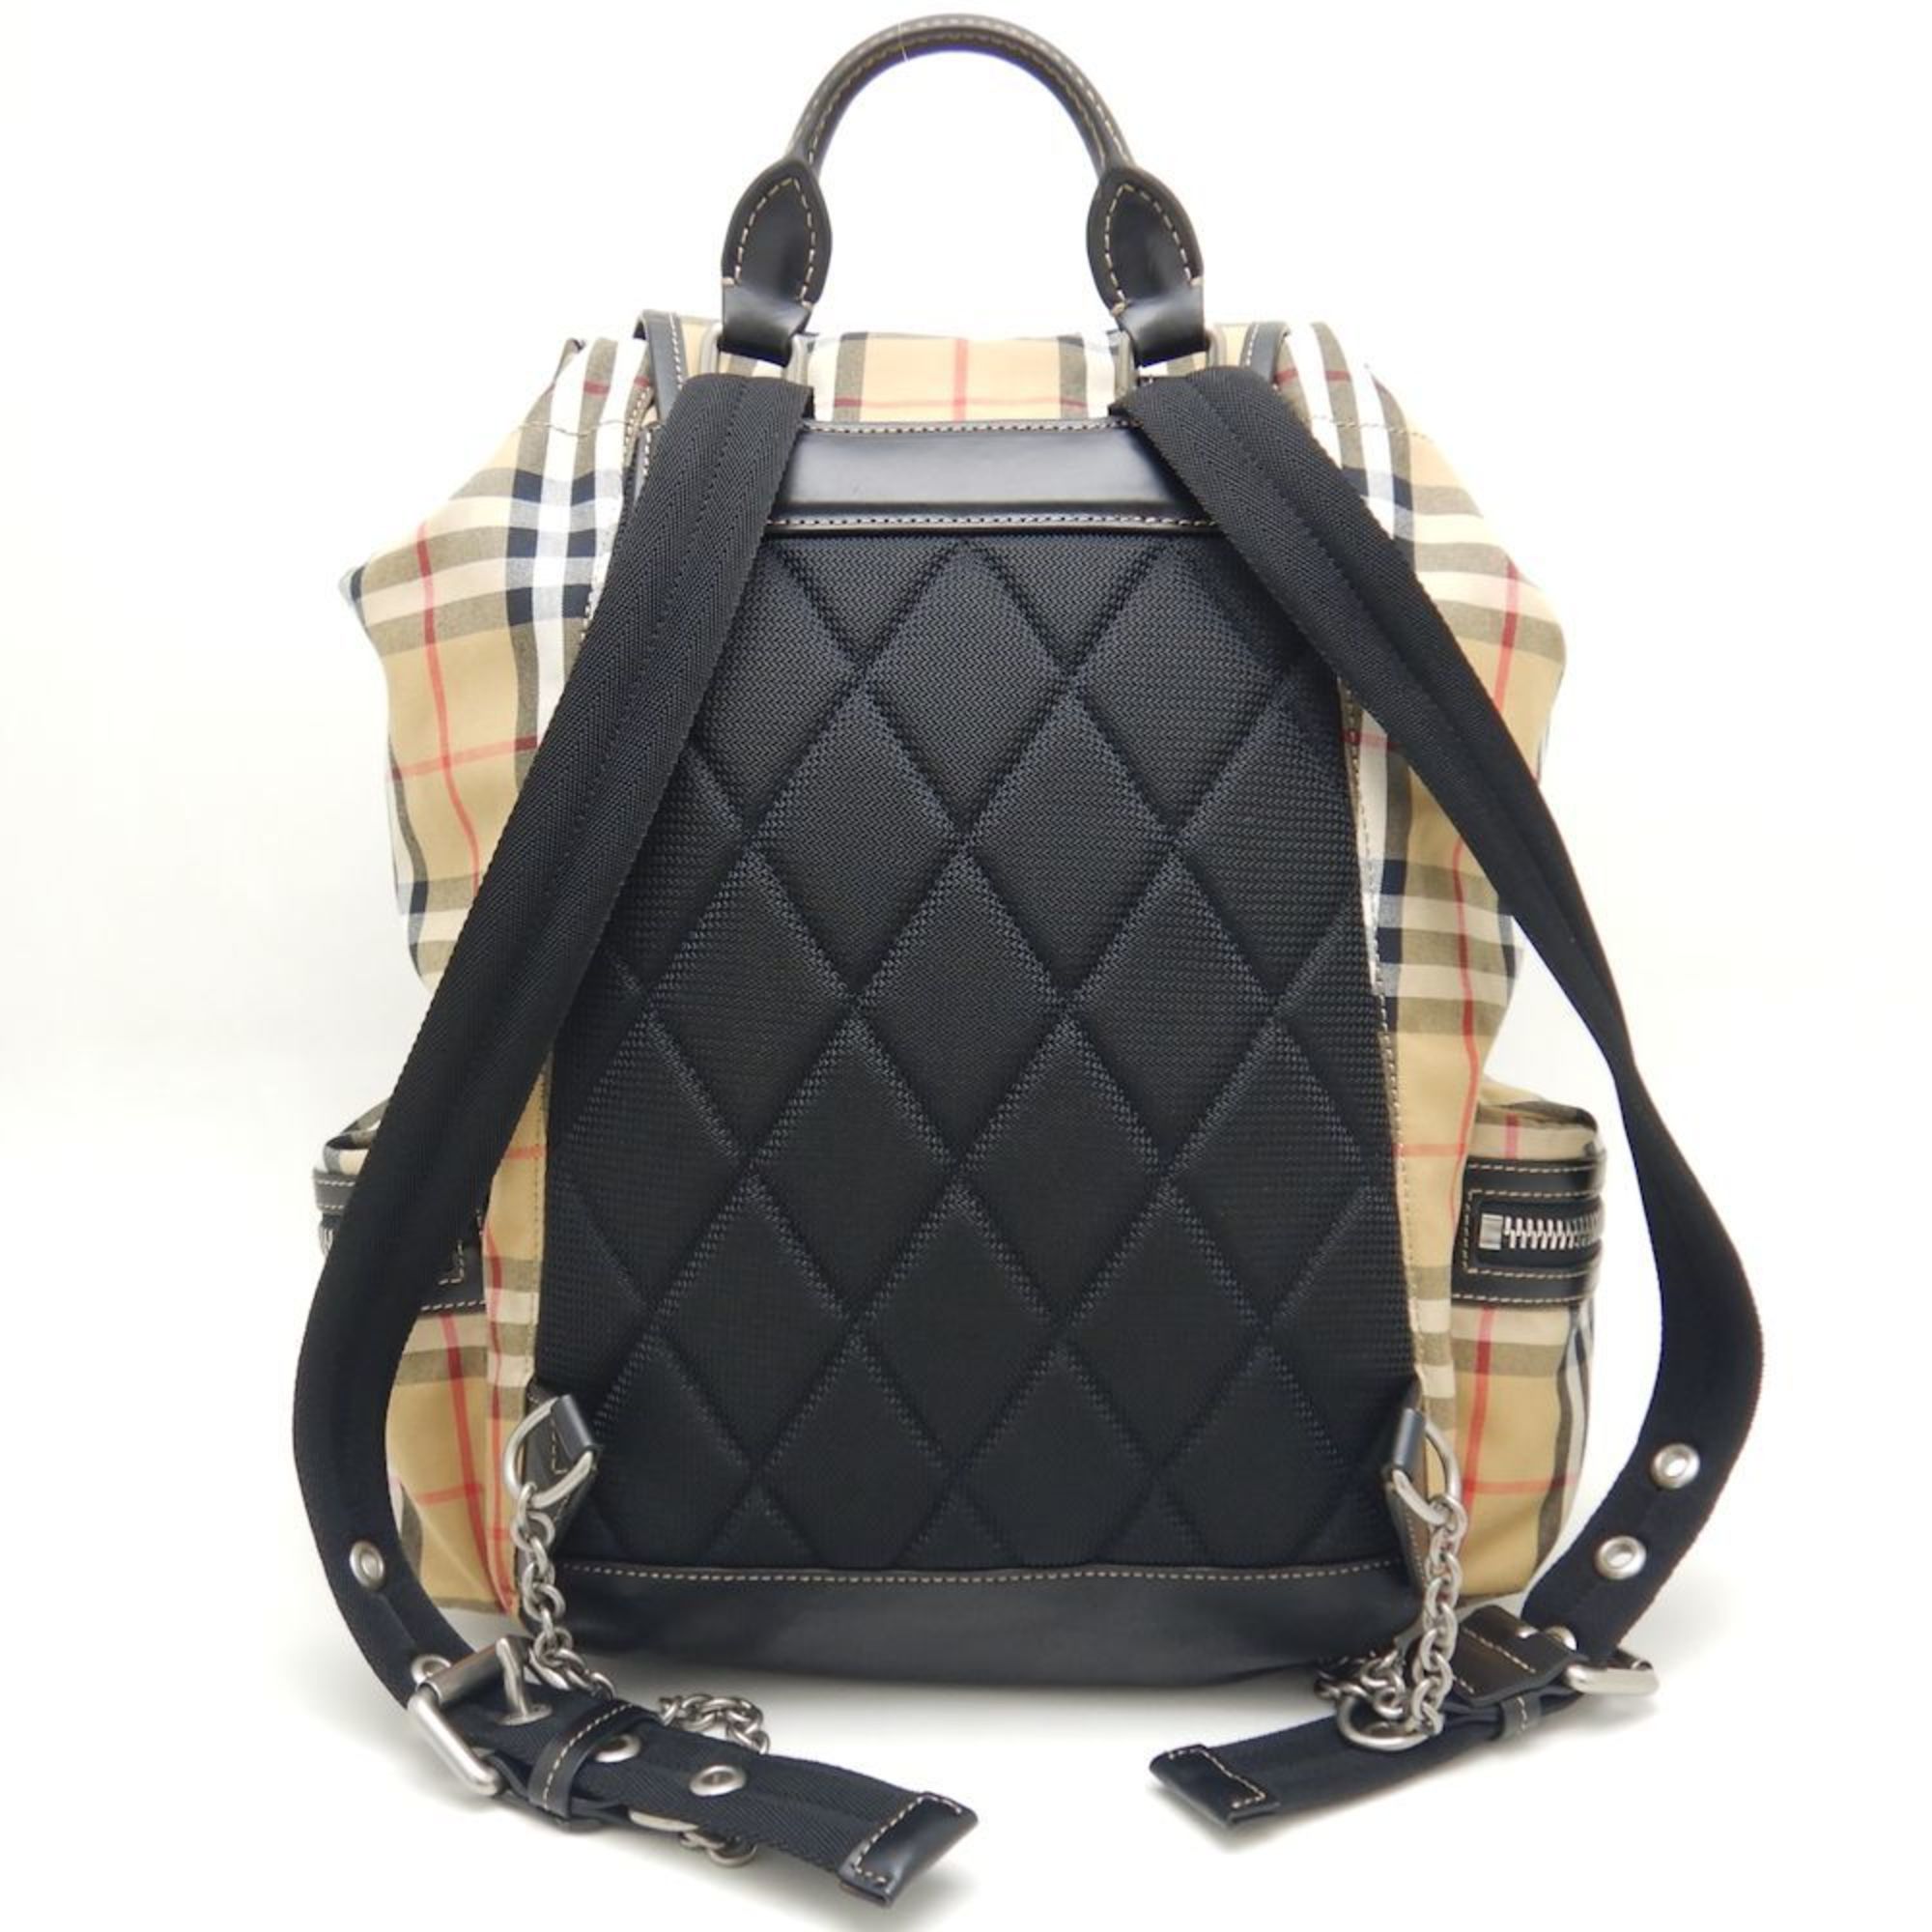 BURBERRY 40759731 Backpack Nova Check Cotton Canvas x Leather Beige 251642